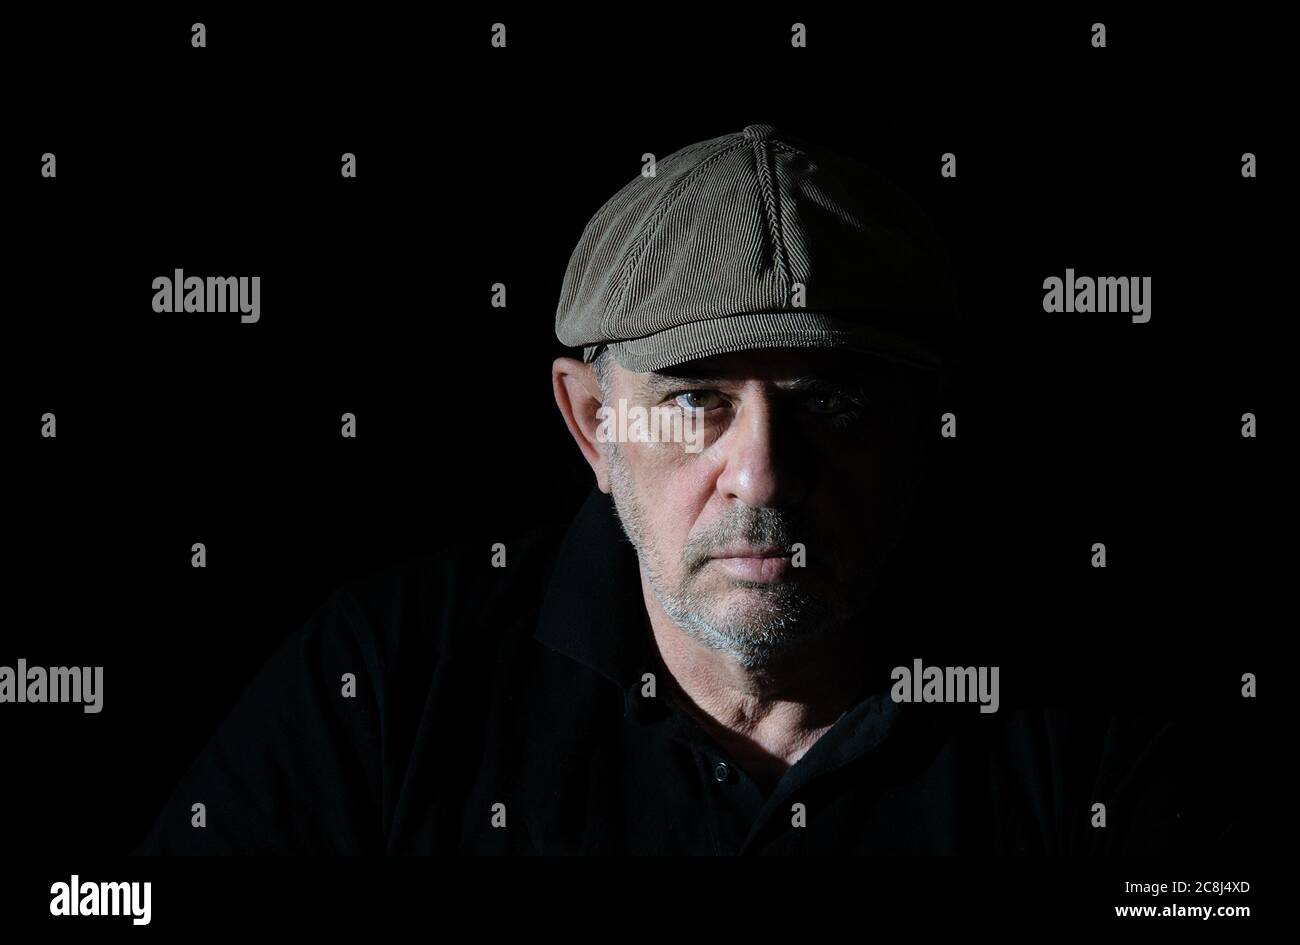 Portrait of elderly man in black clothes on a black background Stock Photo